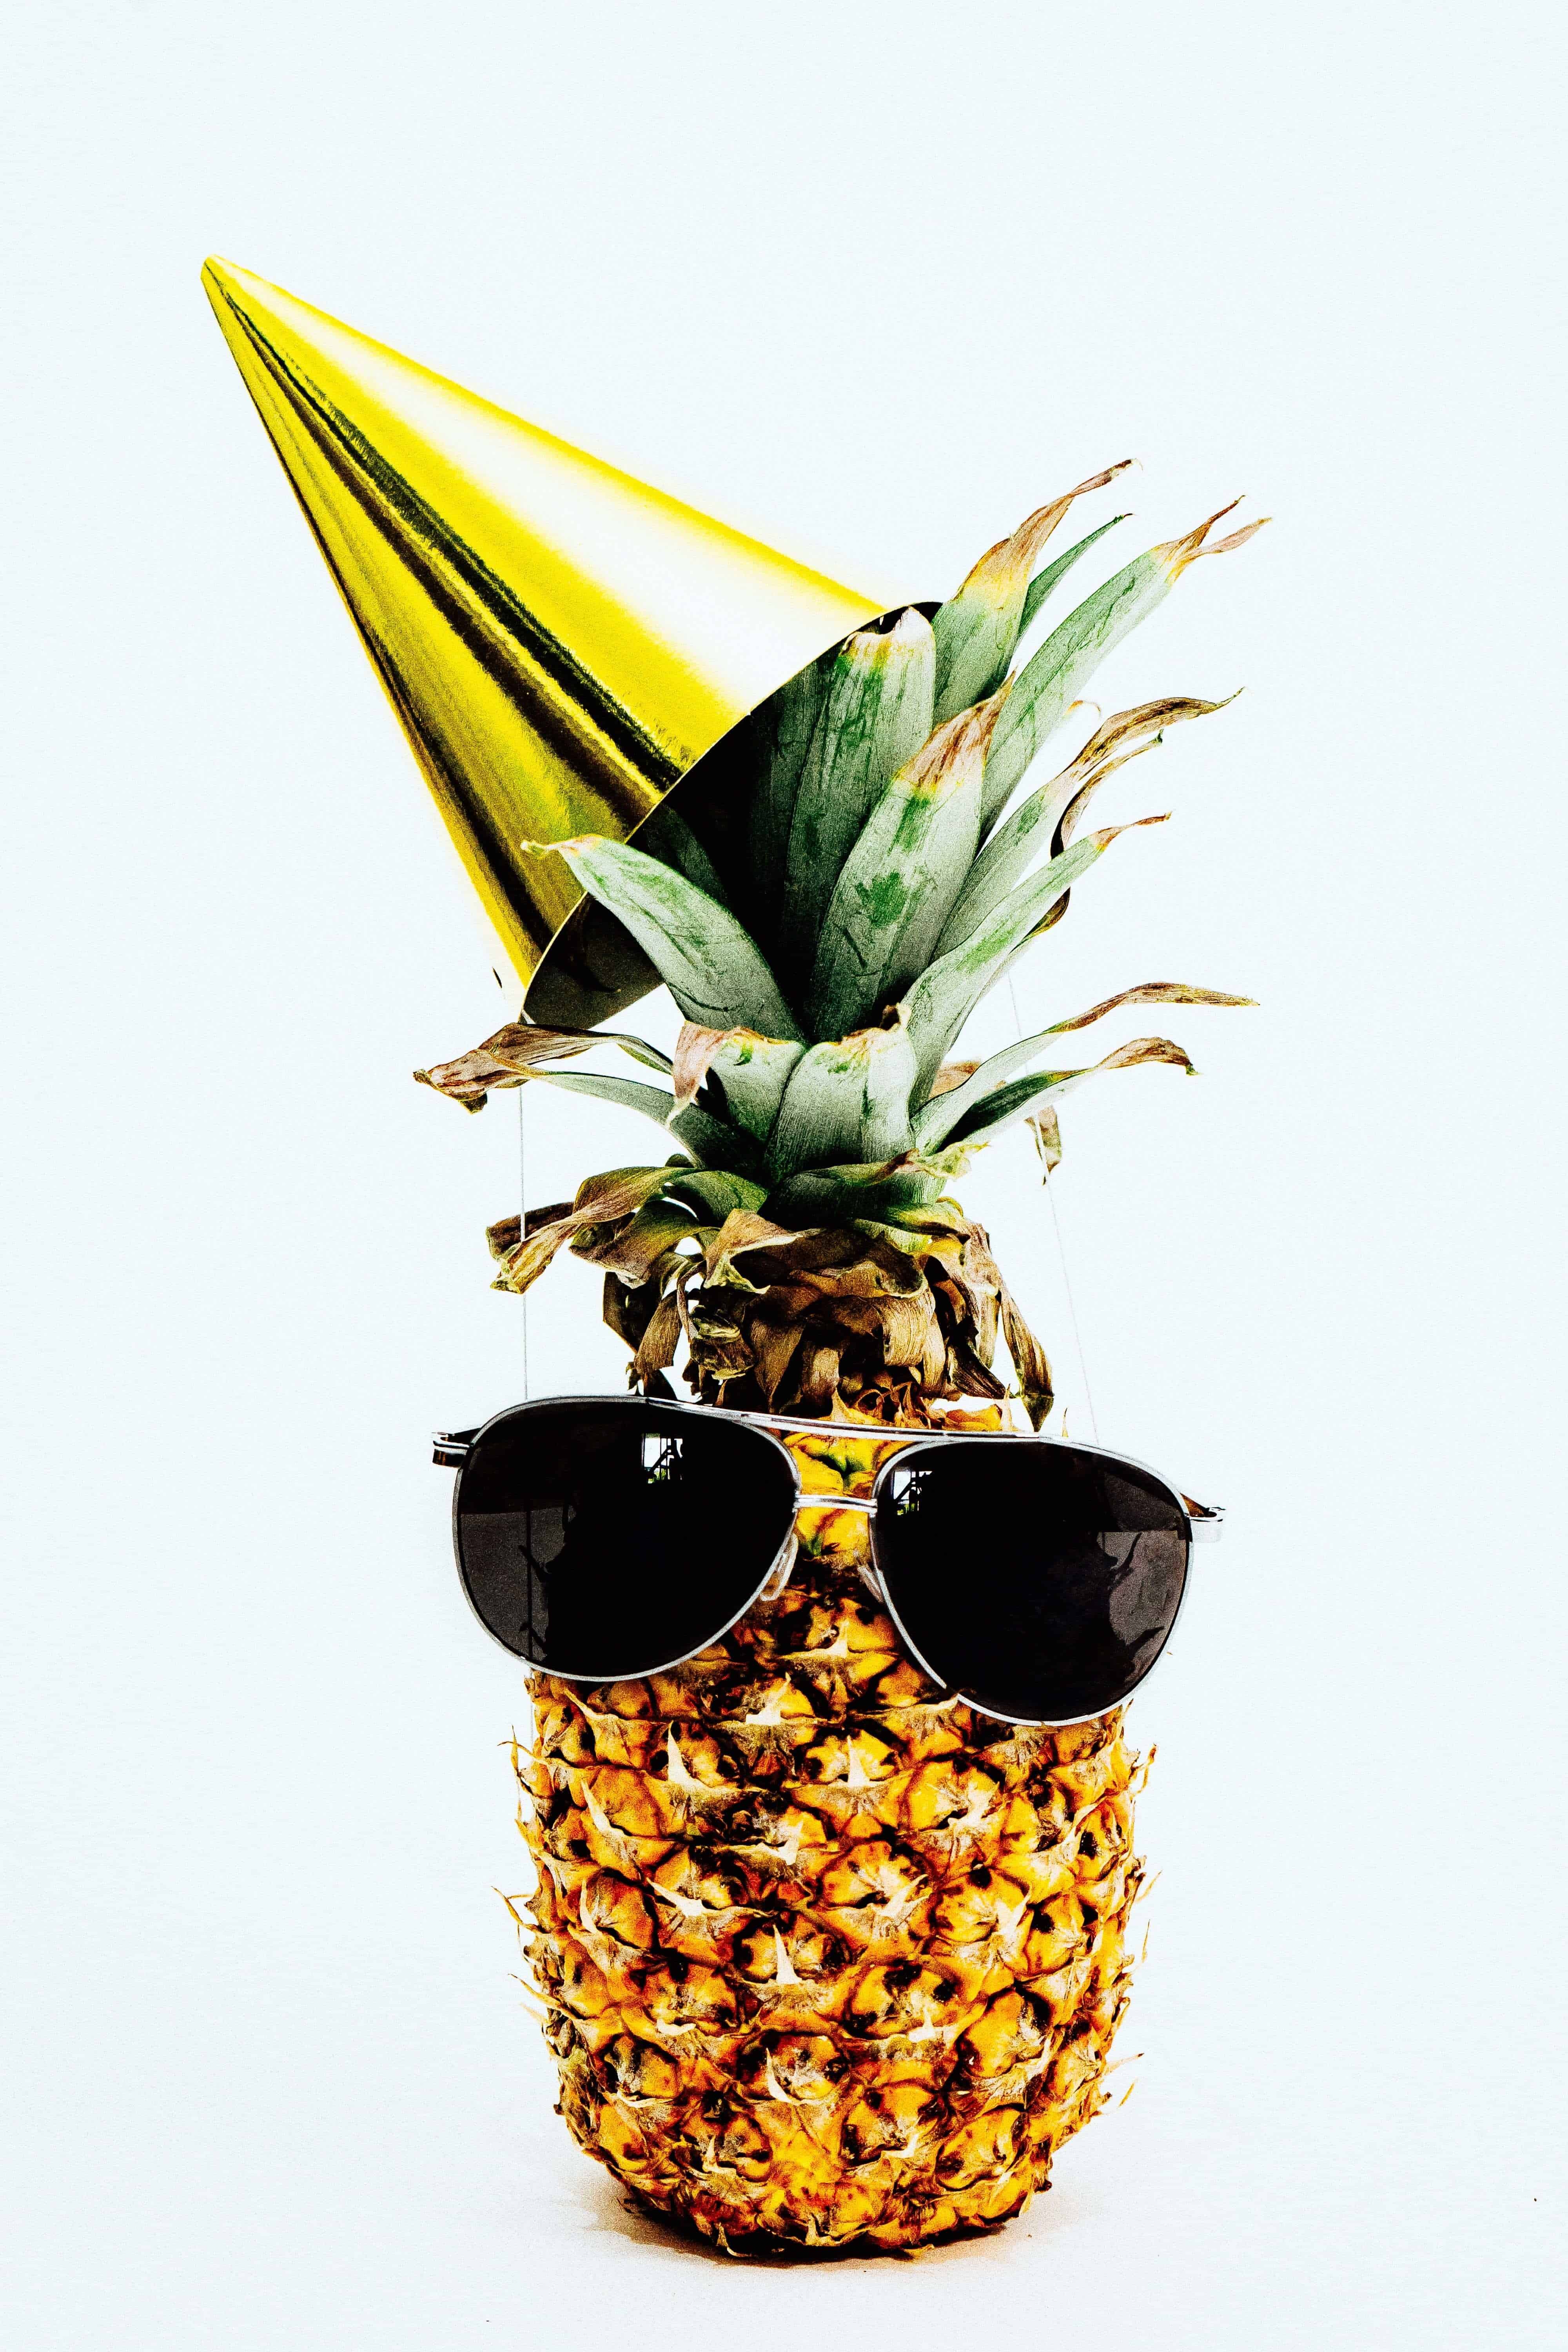 A pineapple wearing sunglasses and a party hat